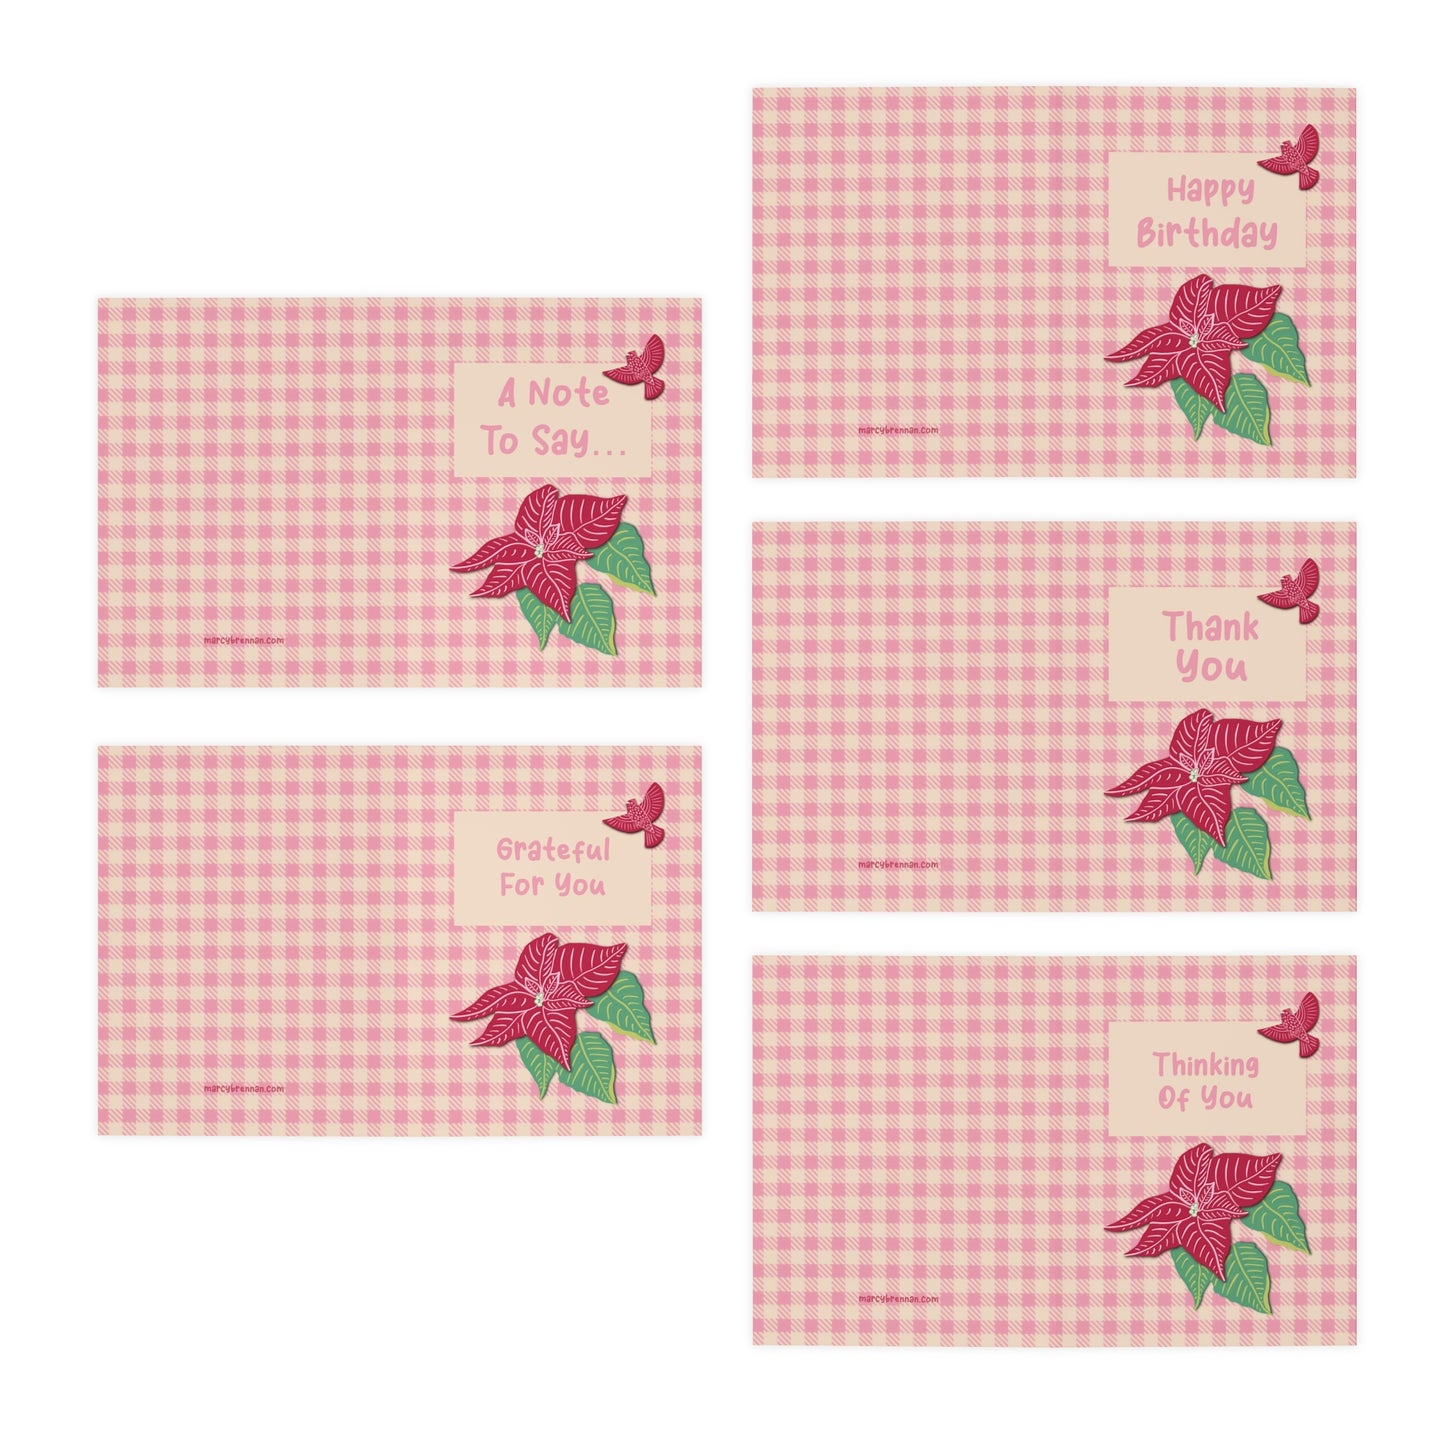 Pink Poinsettia on Pink Plaid Multi-Occasion Multi-Design Greeting Cards (5-Pack) - FREE SHIPPING